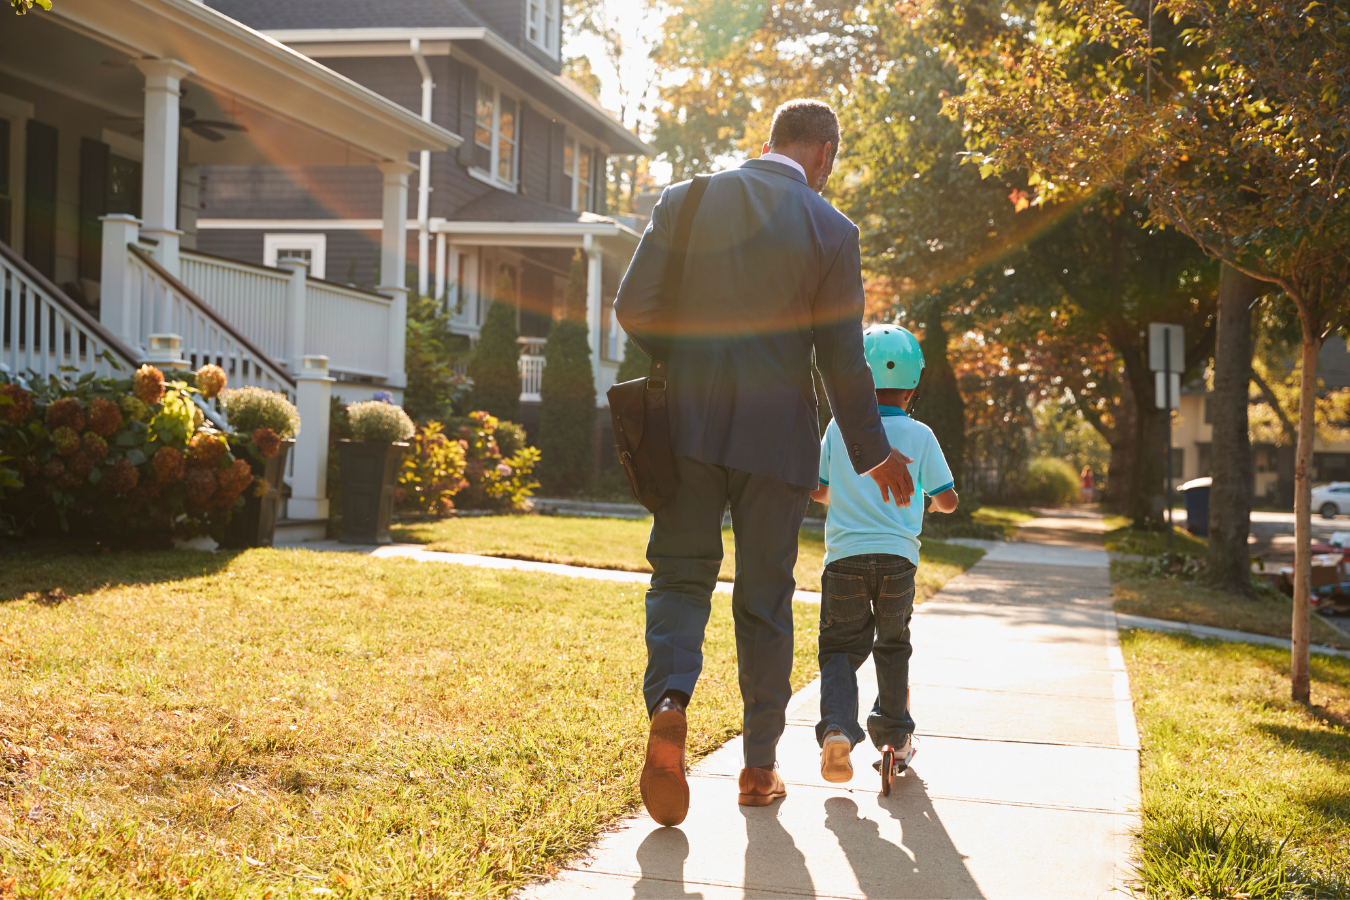 How to Find an Up-and-Coming Neighbourhood Your Family will Love